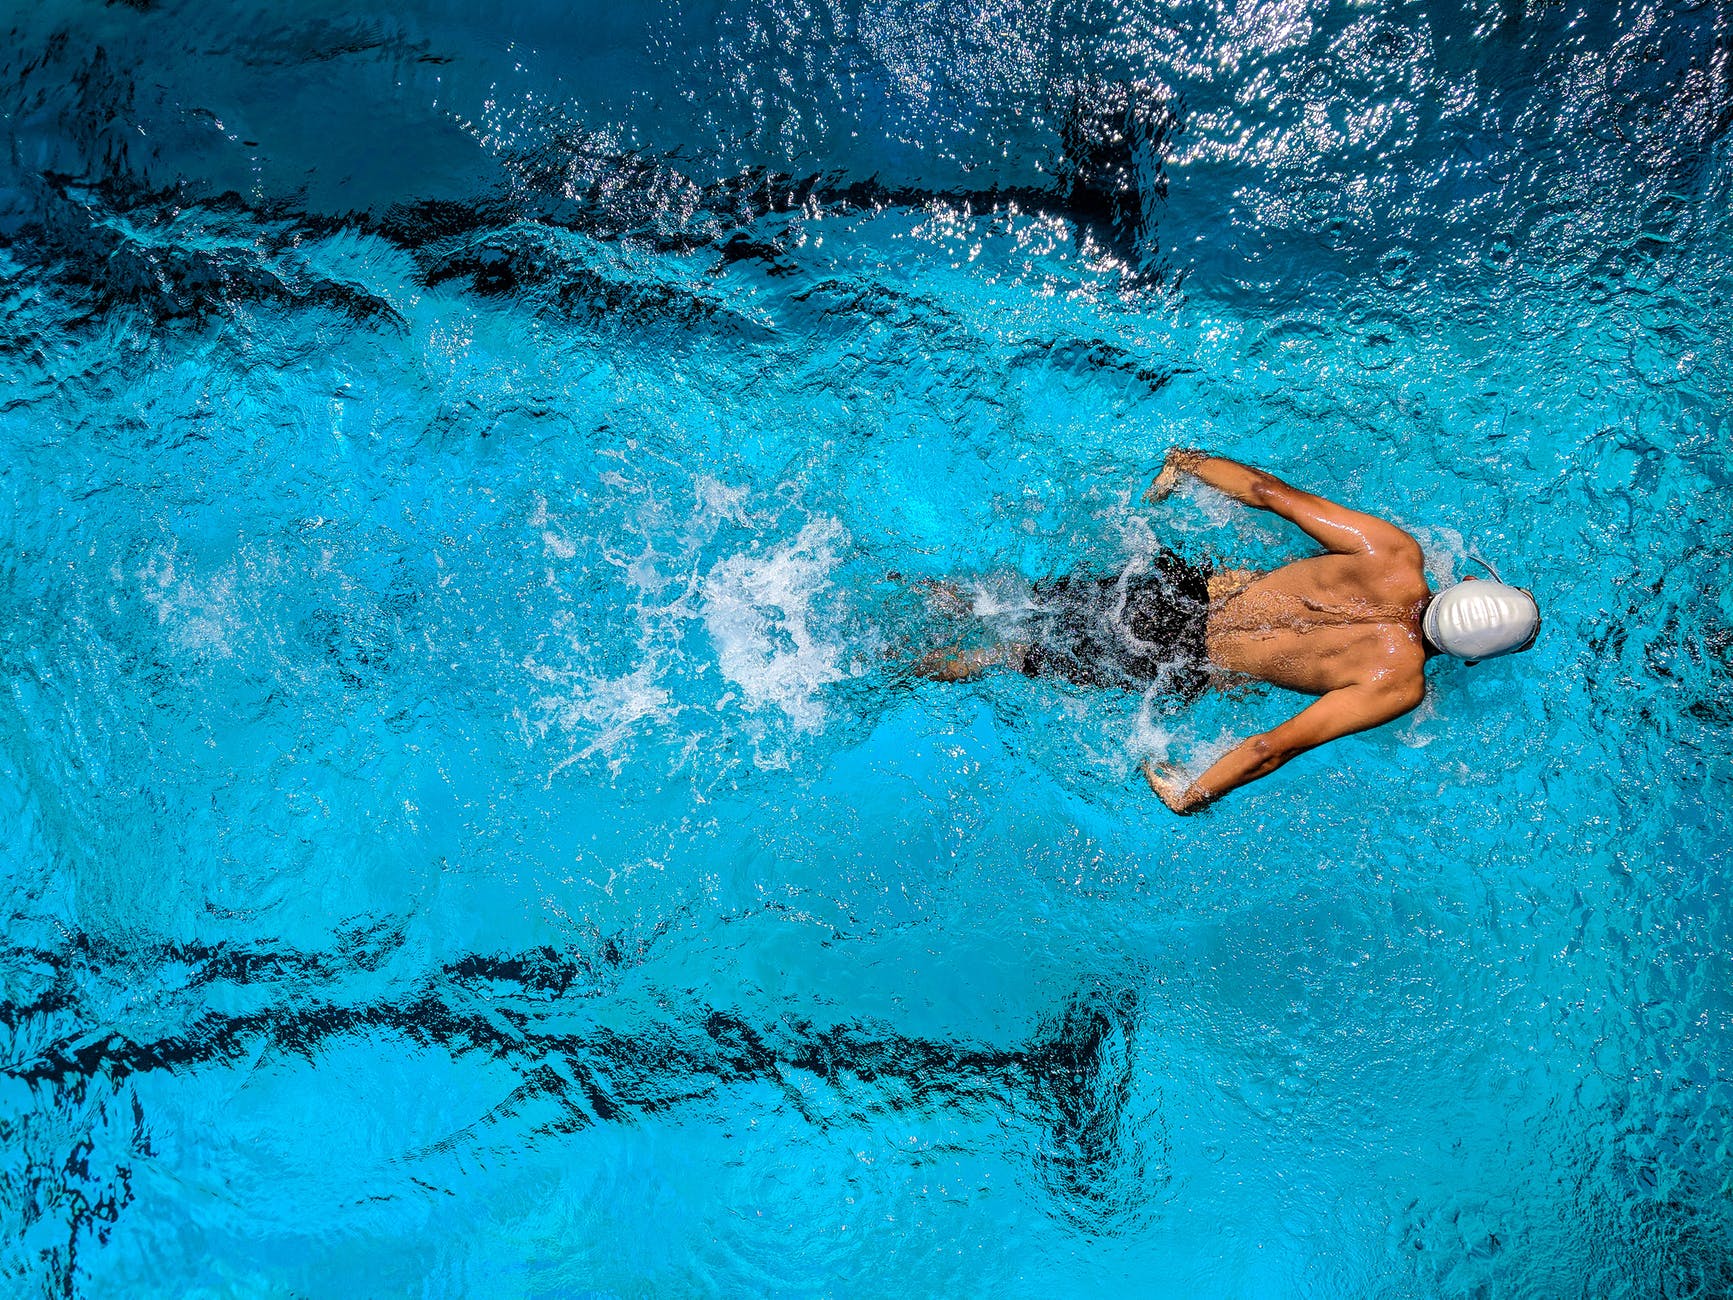 Amazon Prime Video and Swimming Australia announce exclusive, worldwide two-year live broadcast streaming deal